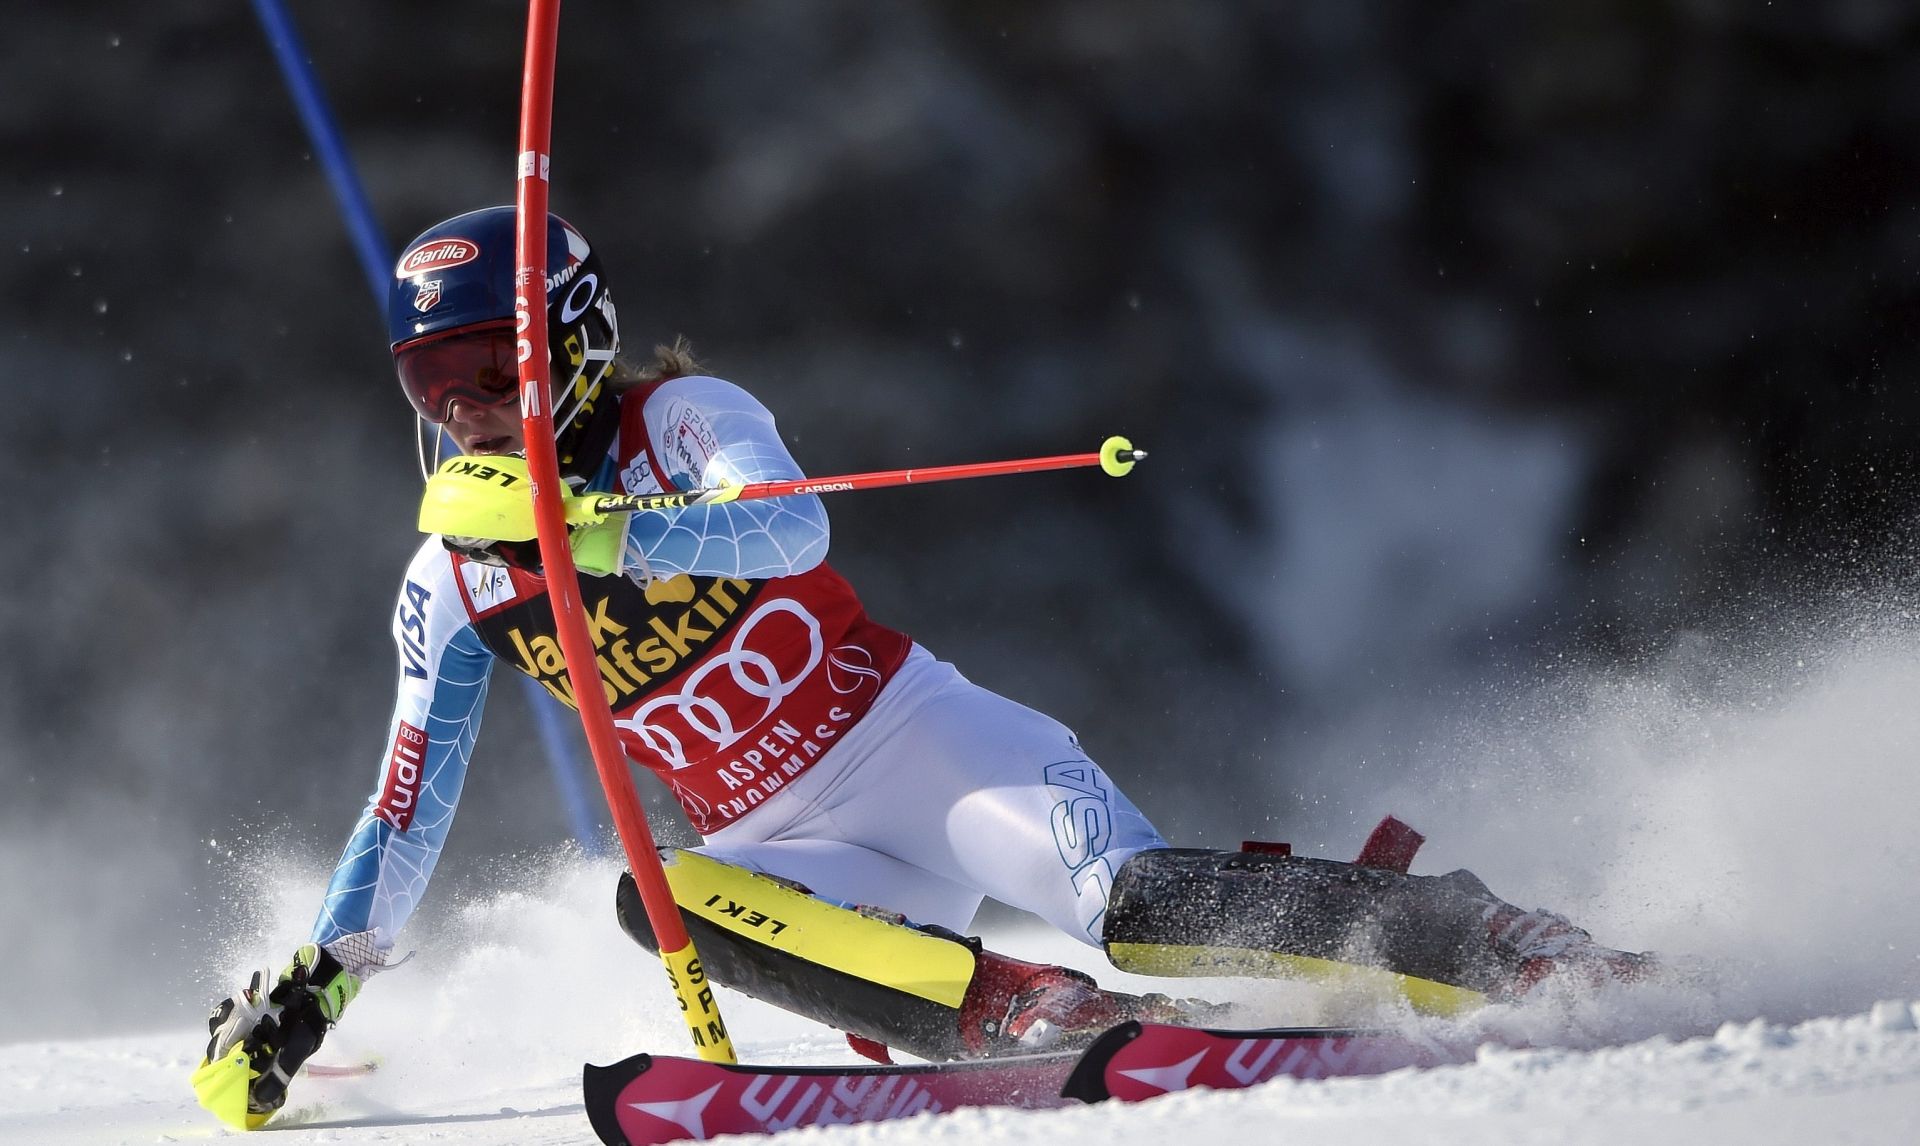 epa05047848 Mikaela Shiffrin of the US skis during the women's second day of the FIS Alpine Ski World Cup Slalom first run in Aspen, Colorado, USA, 29 November 2015.  EPA/JOHN G. MABANGLO